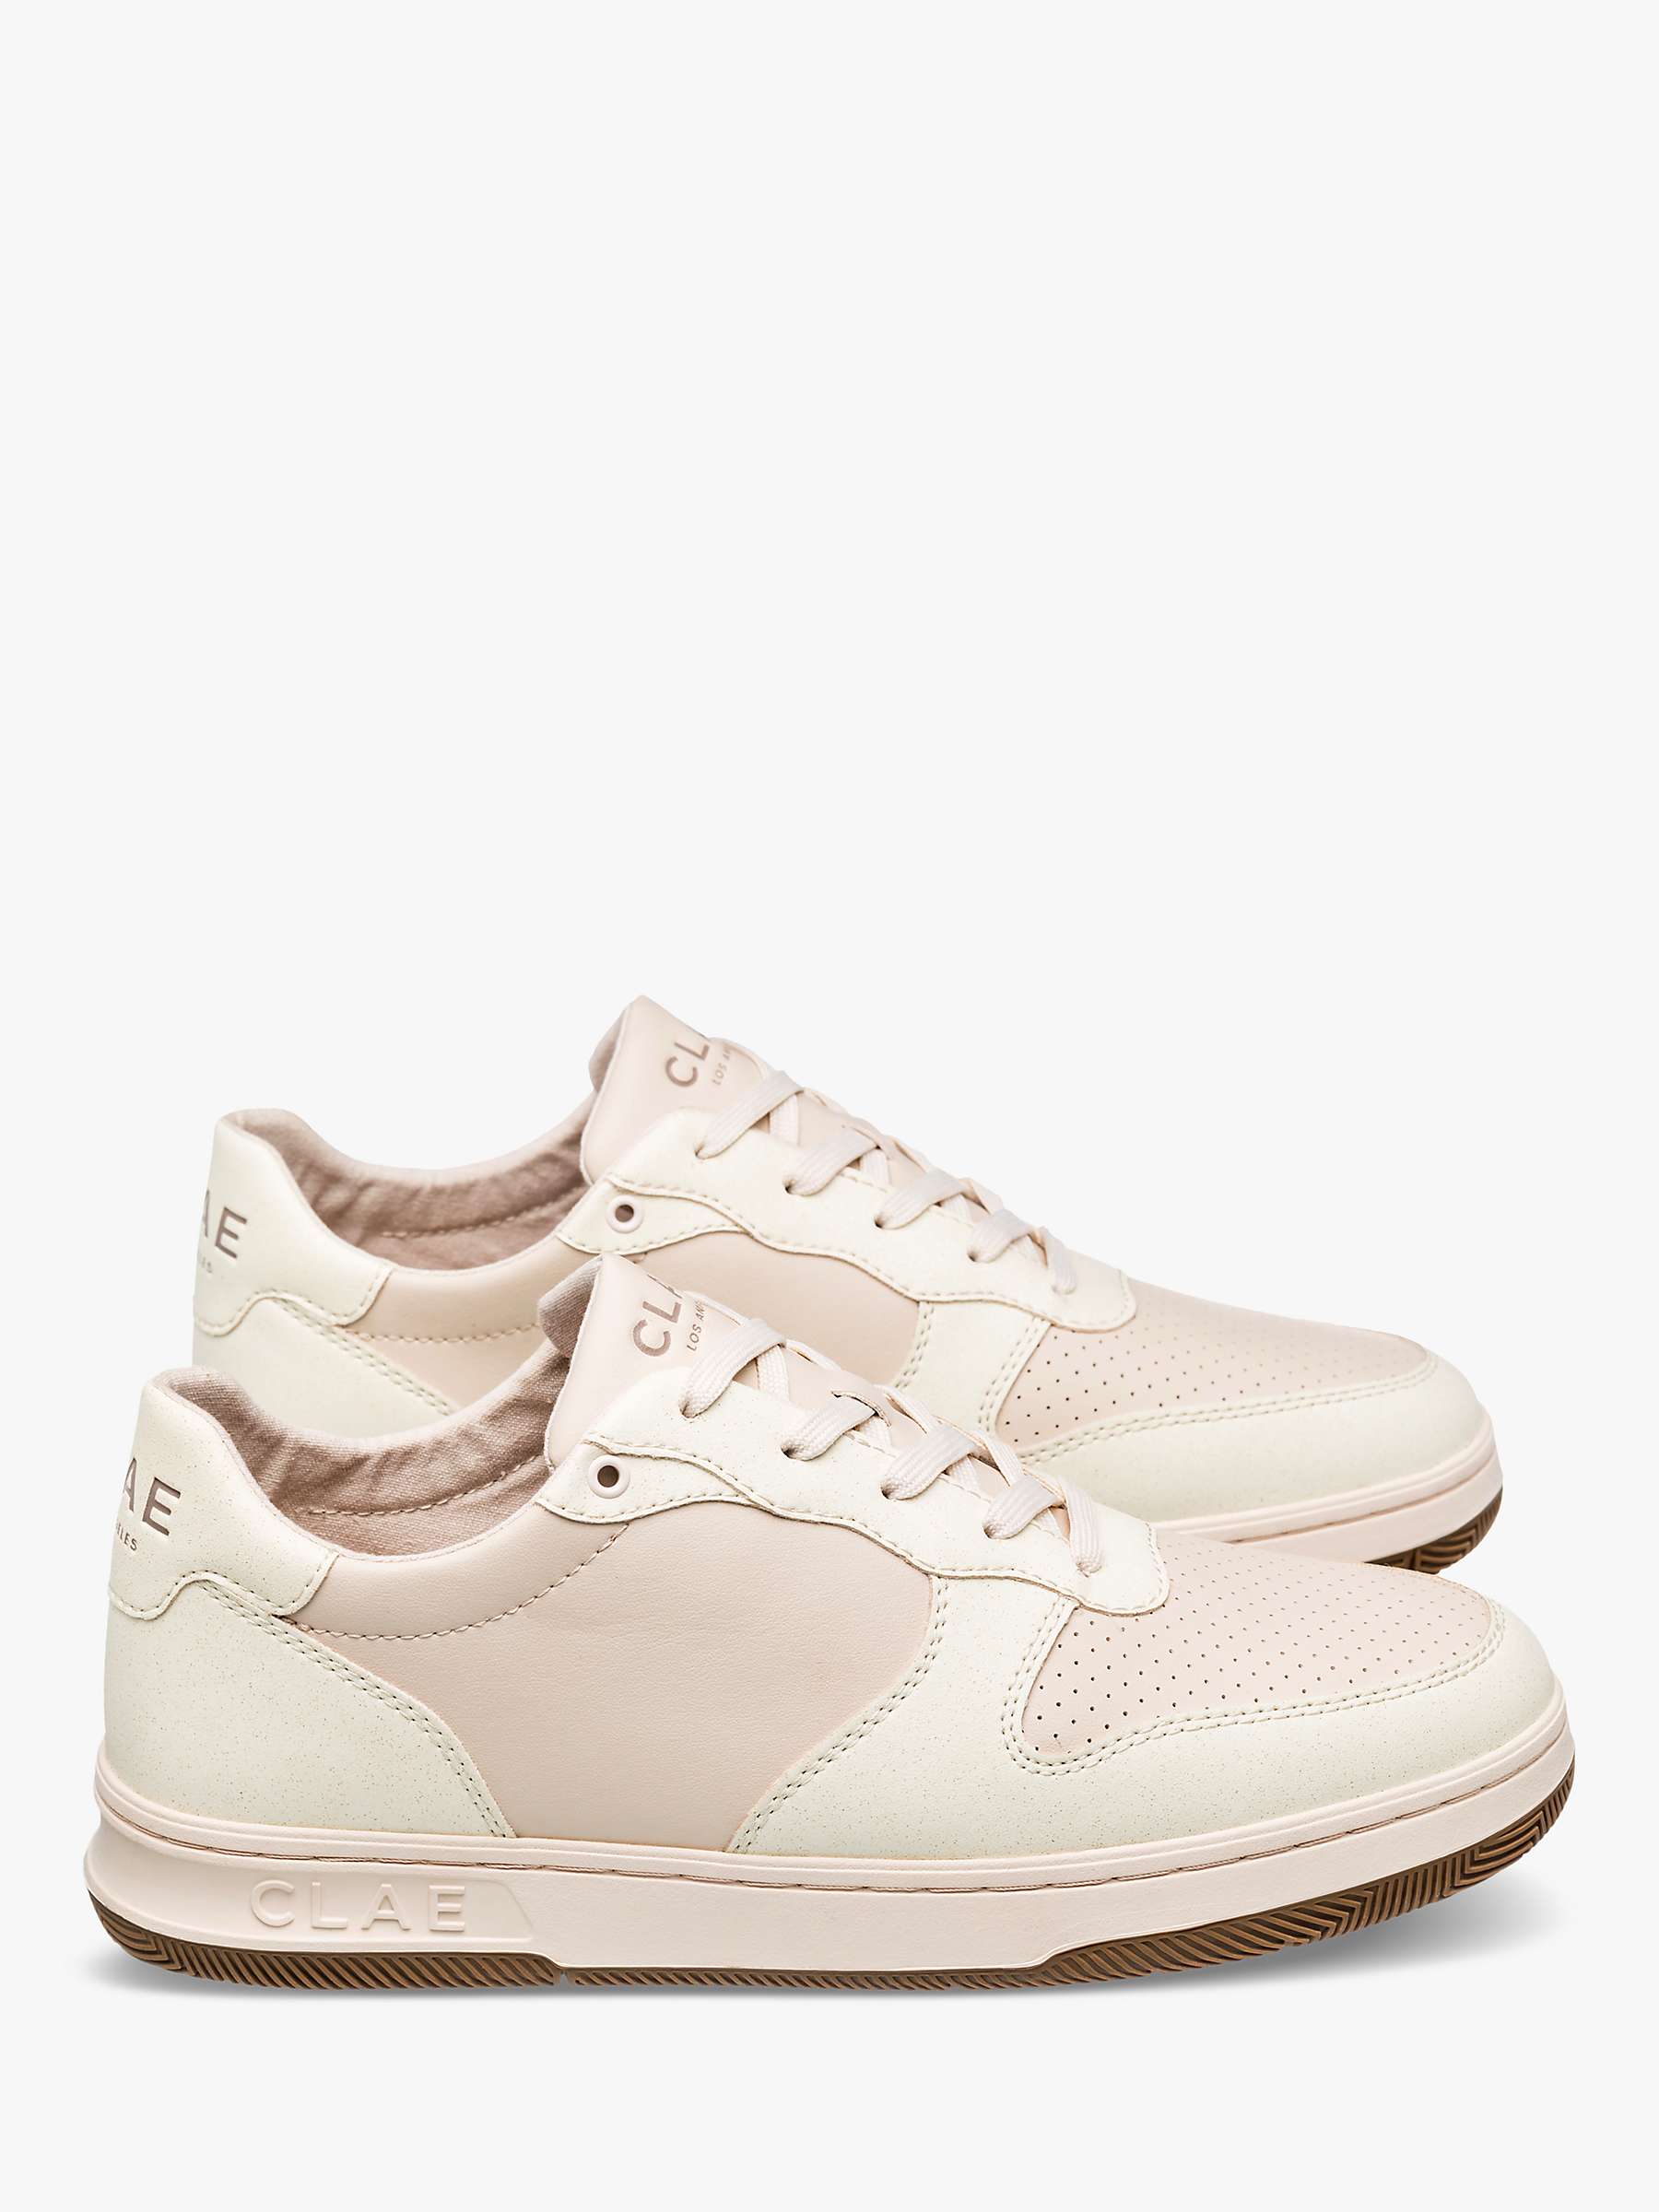 Buy CLAE Malone Apple Low Top Trainers Online at johnlewis.com